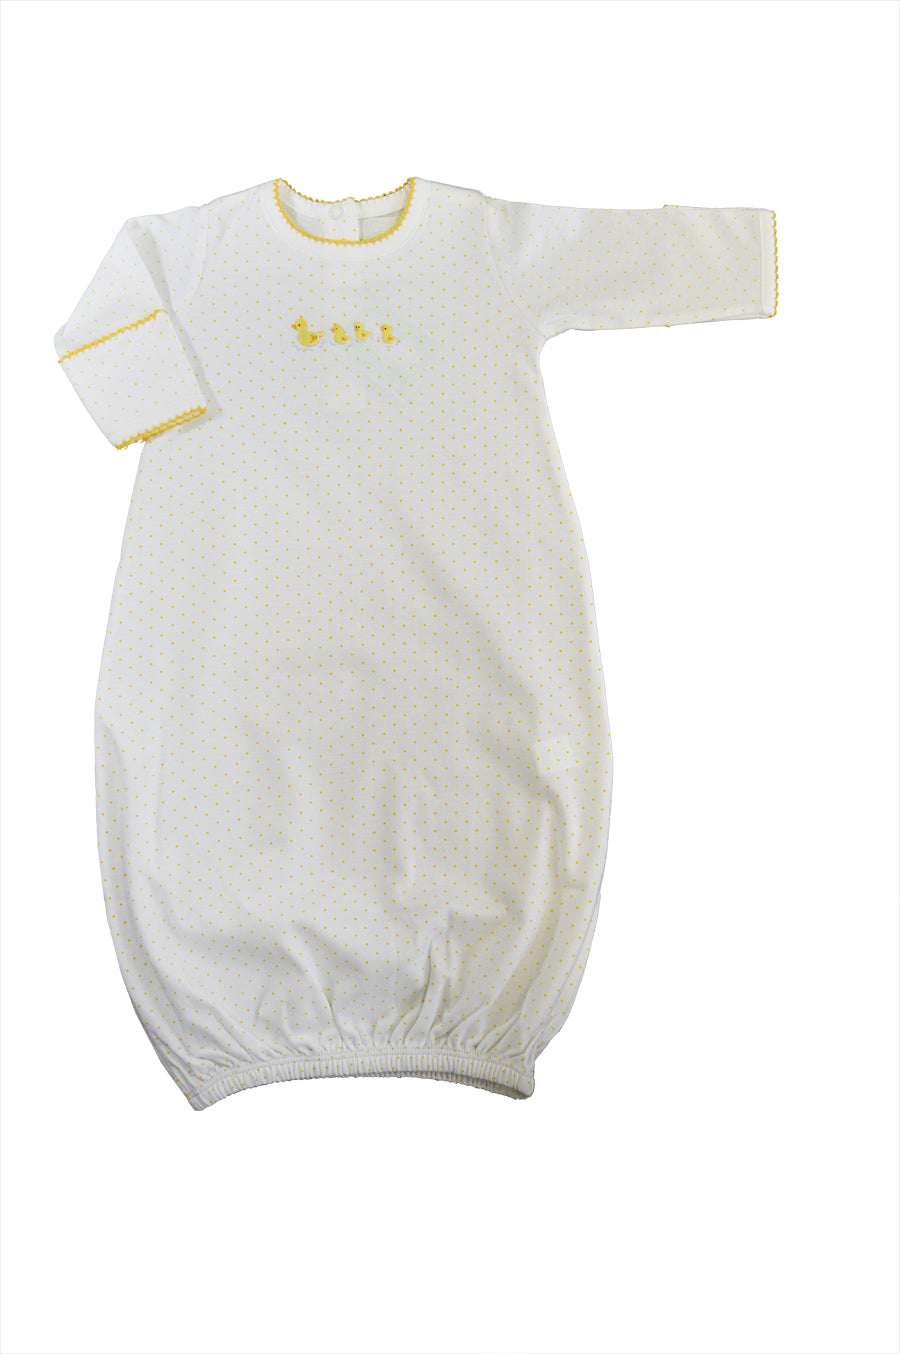 Baby Duckies Daygown - Little Threads Inc. Children's Clothing